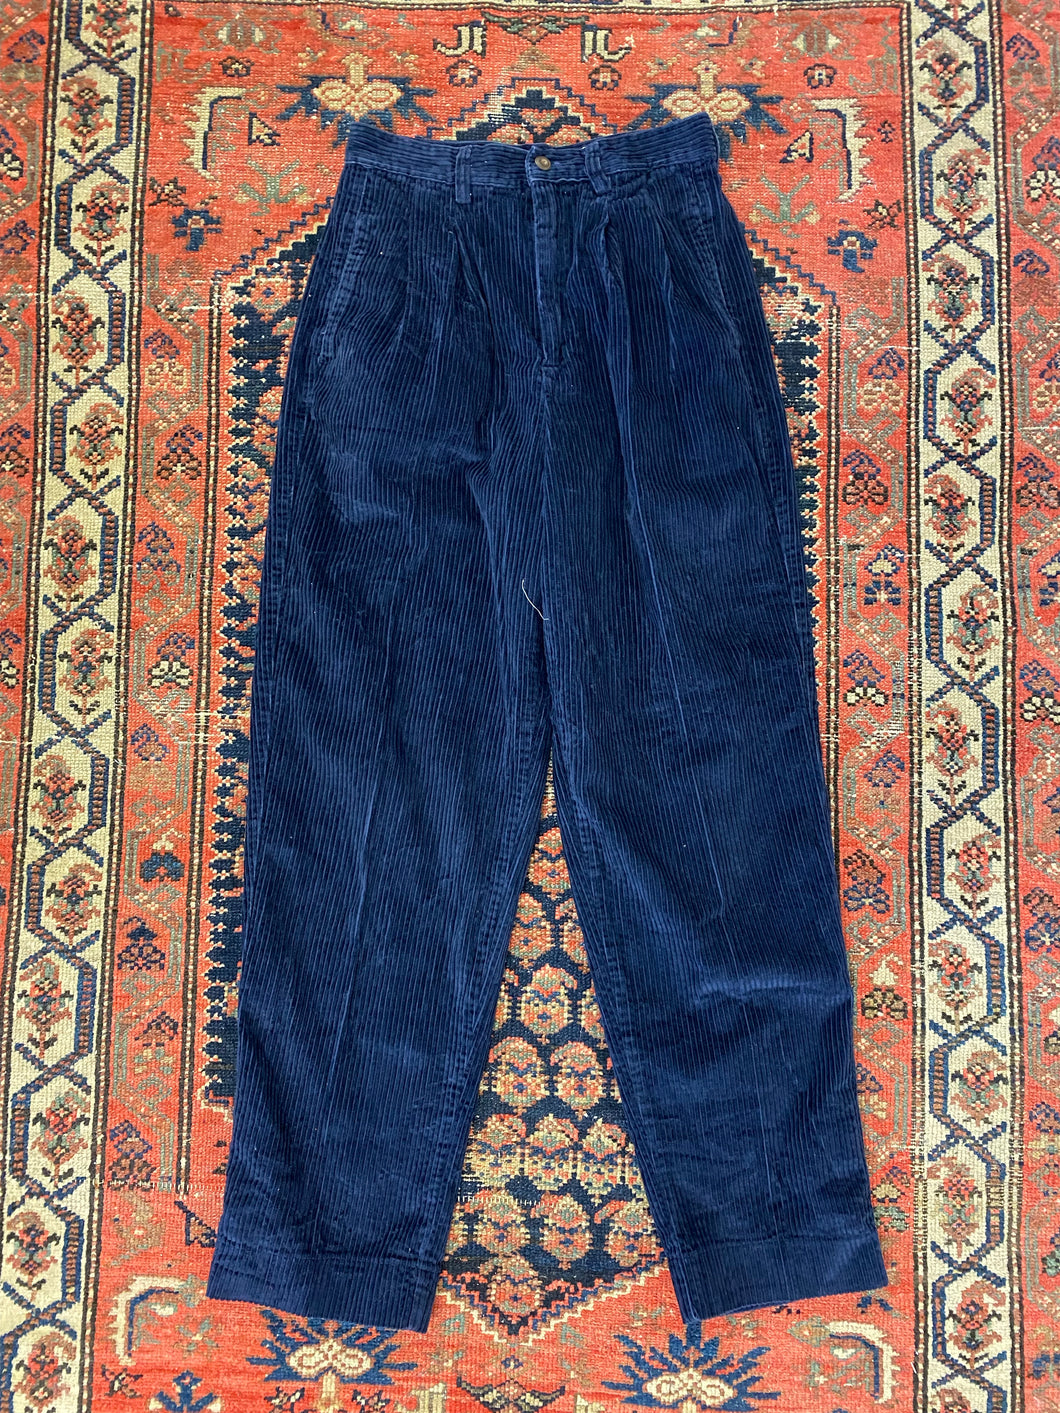 Vintage Pleated Corduroy Pants - 26inches